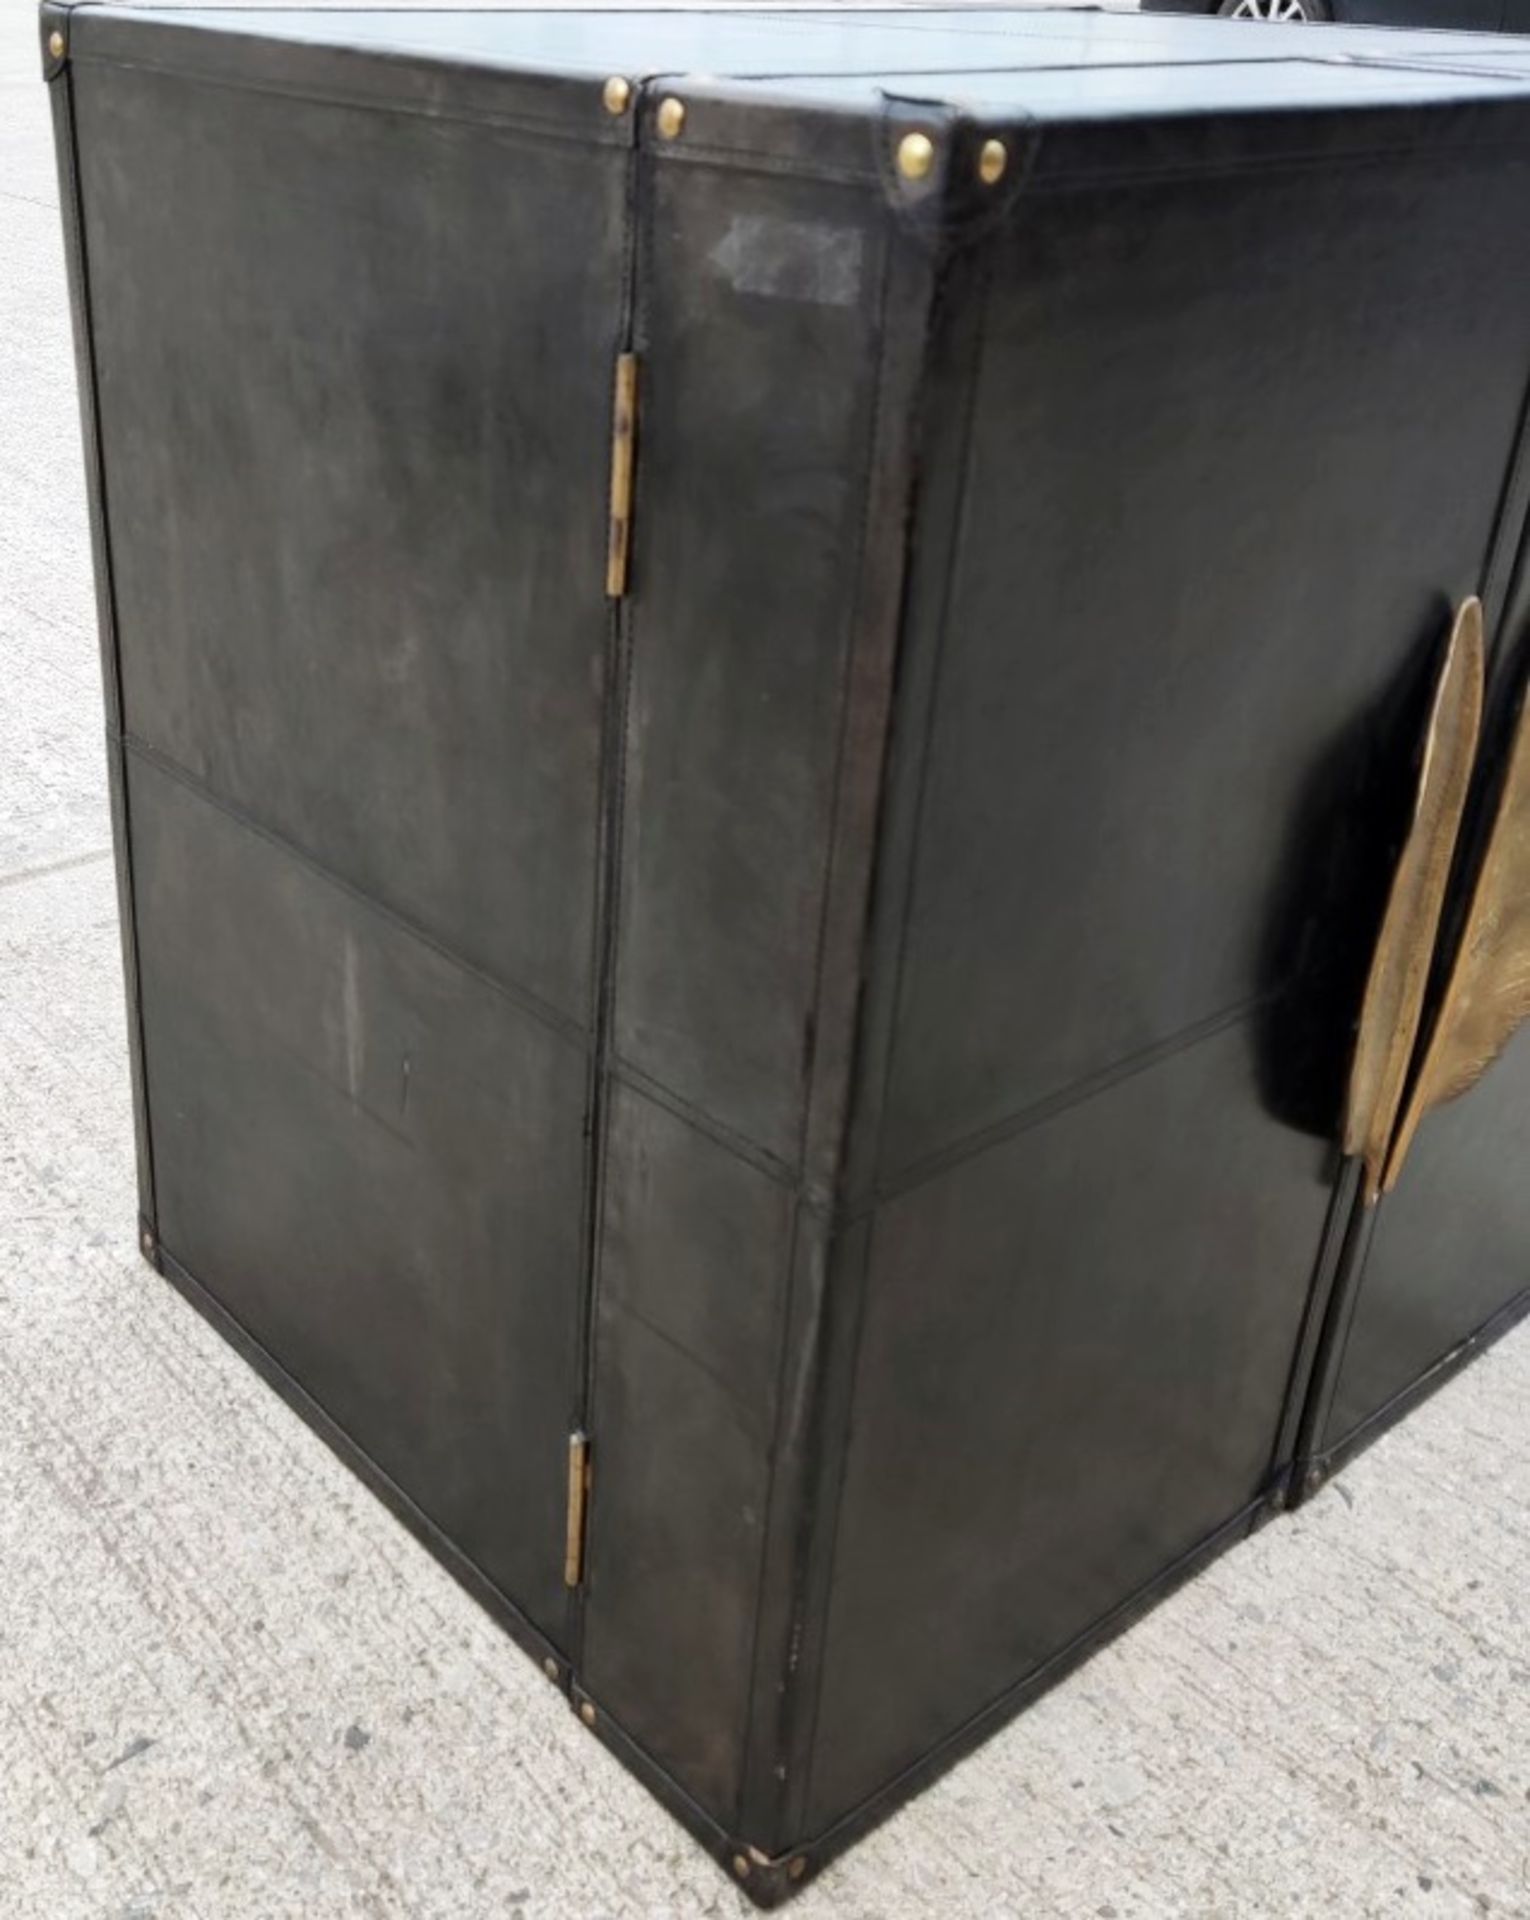 1 x Opulent Leather Upholstered 2-Door Cocktail Cabinet In A Dark Stain - Image 2 of 14